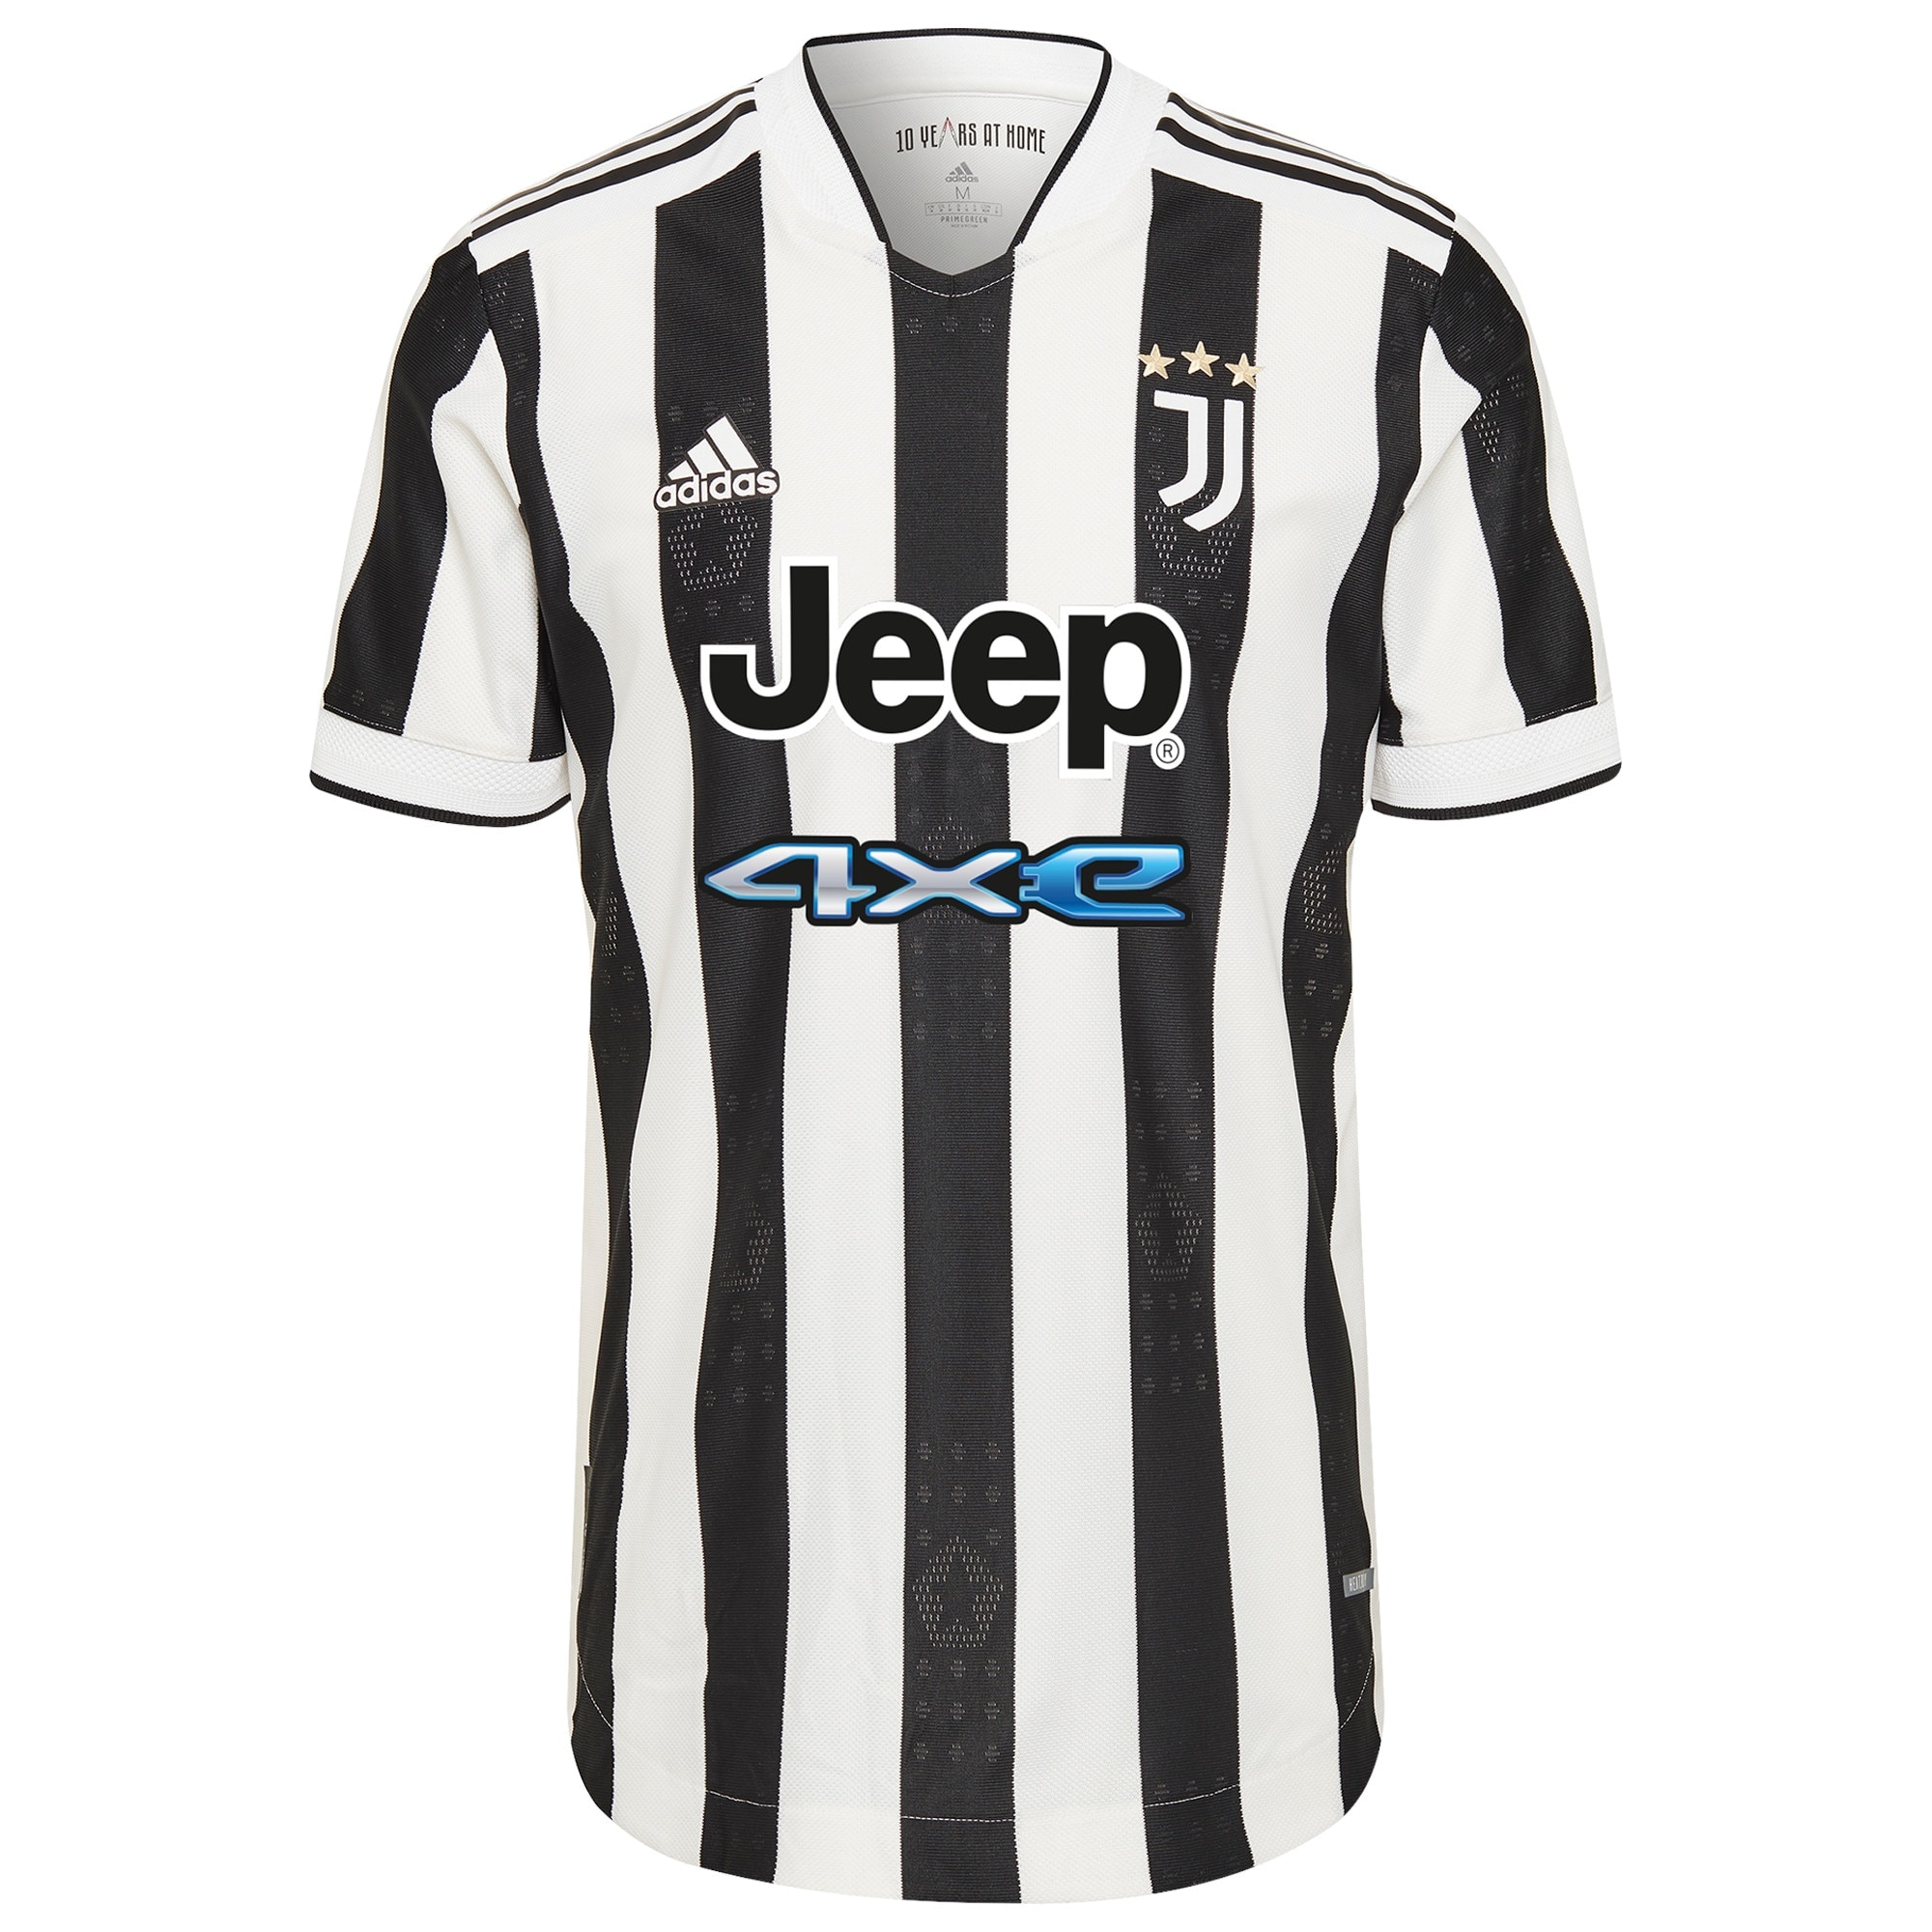 Juventus Home Authentic Shirt 2021-22 with Morata 9 printing